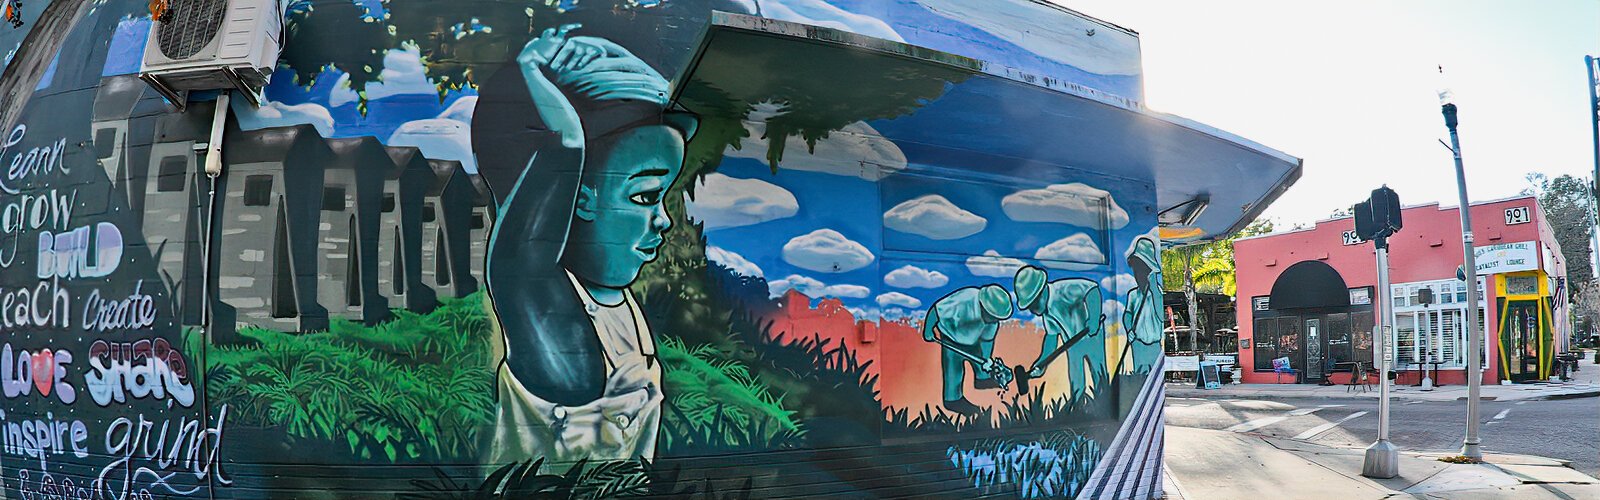 At the corner of 22nd Street South and Ninth Avenue South, a mural inspires residents to cultivate and grow their own food to stop dependence on the grocery store.